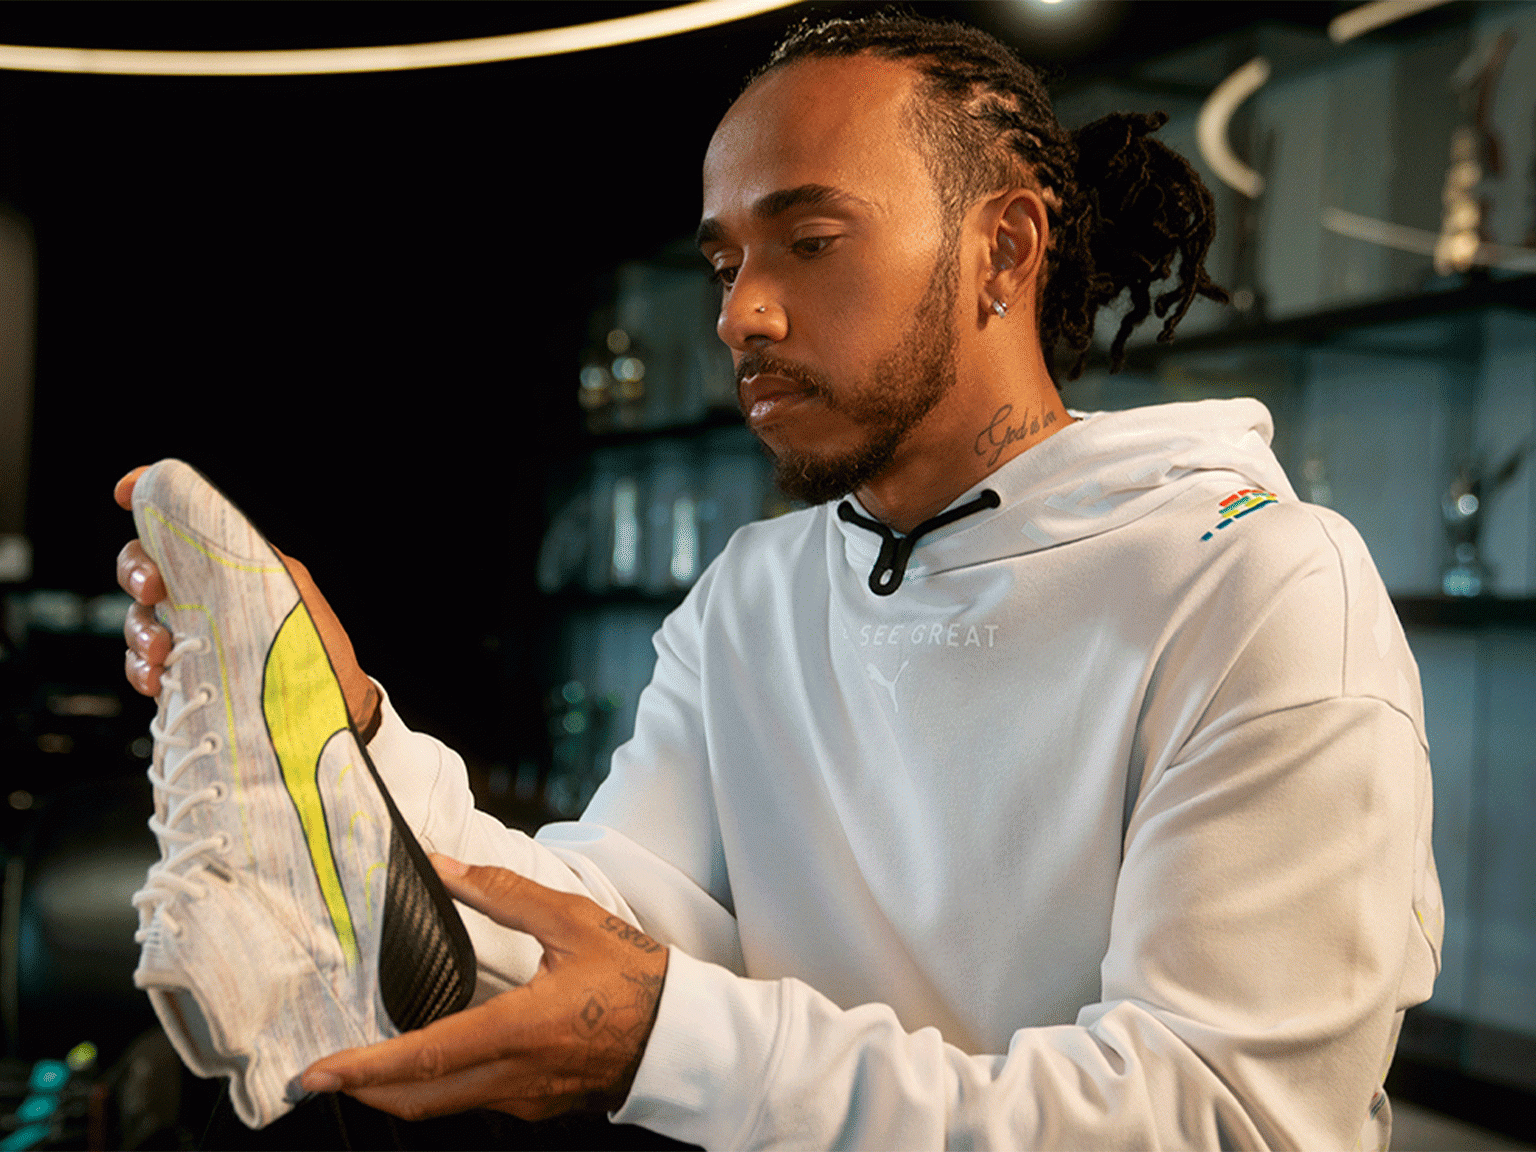 PUMA designs special edition race boot for Lewis Hamilton as part of the  “Only See Great” brand campaign | PUMA®